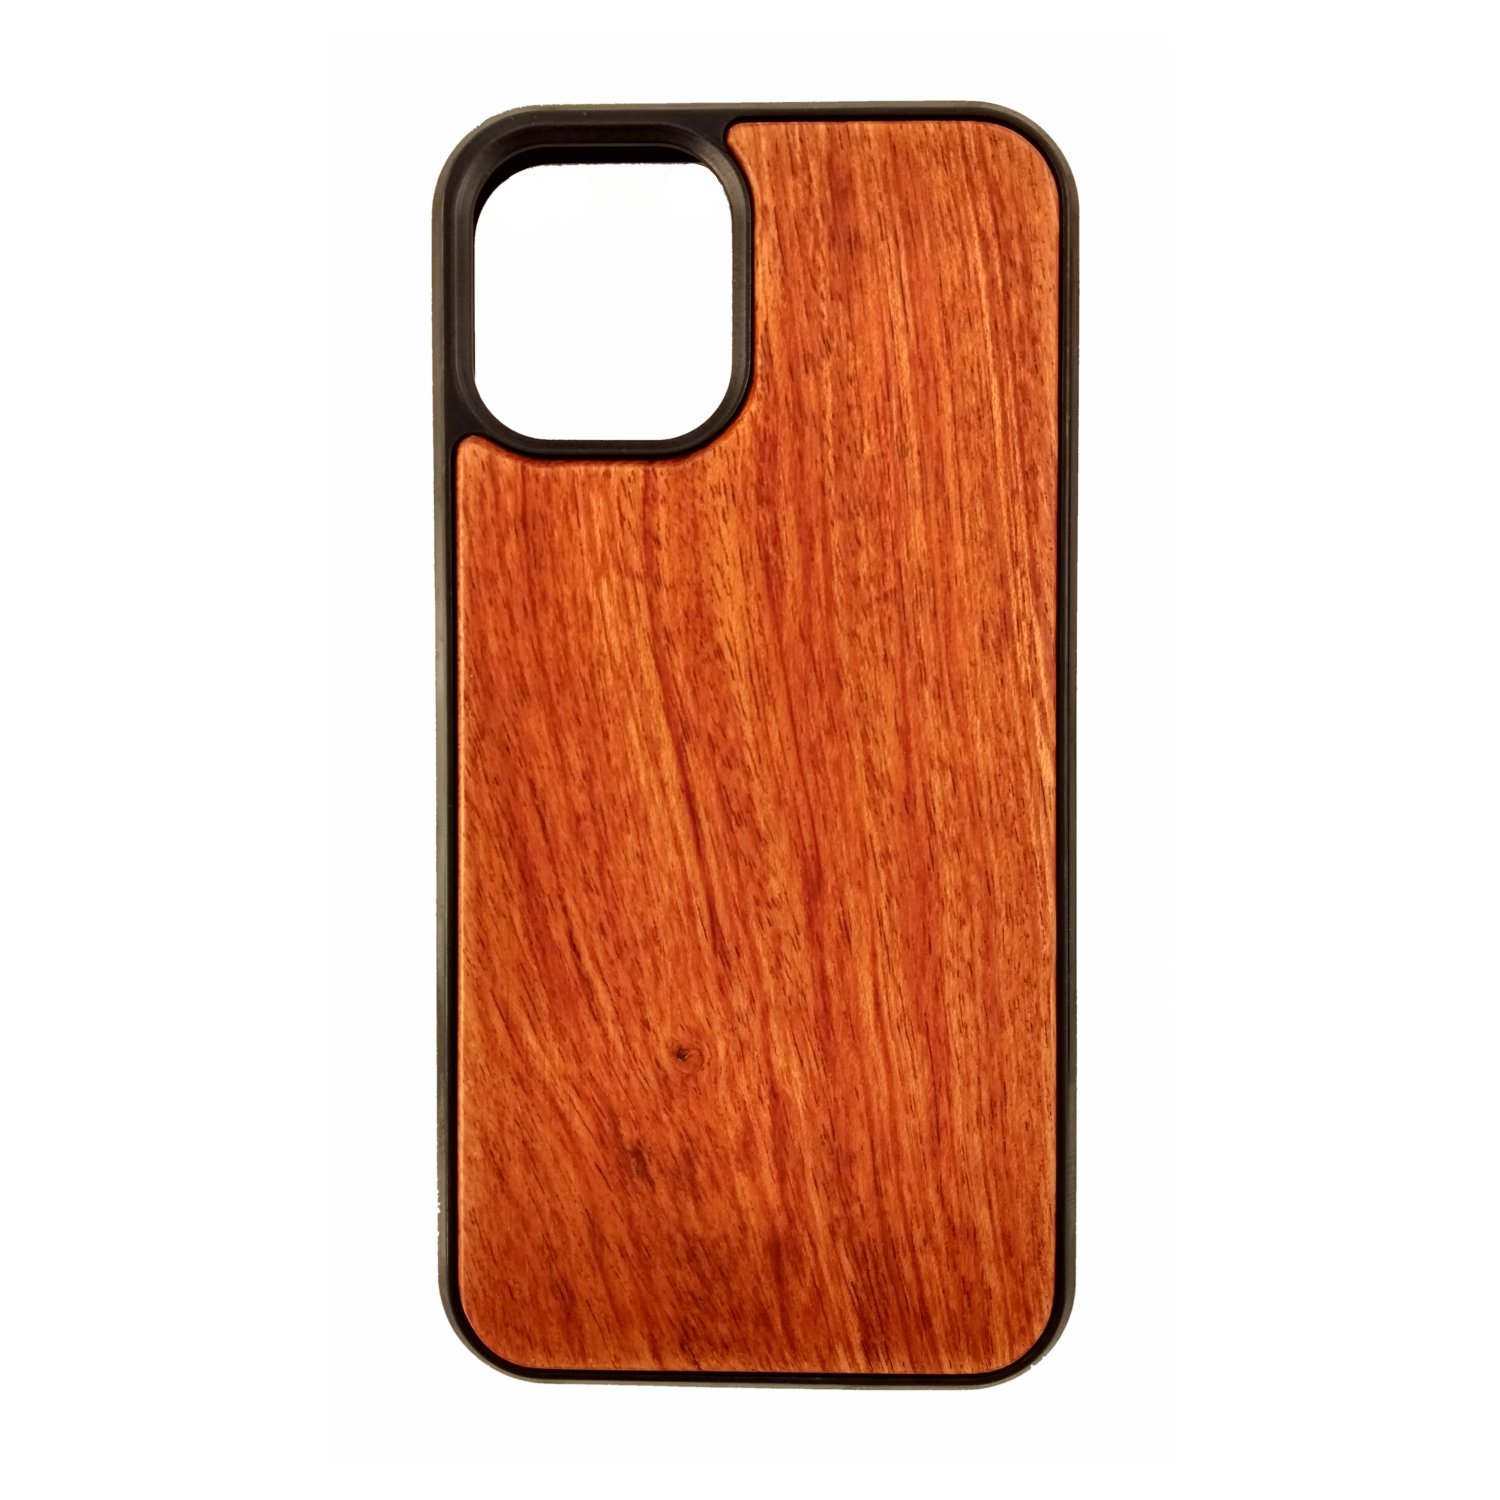 Wooden and plastic protective cover for Iphone 12 mini